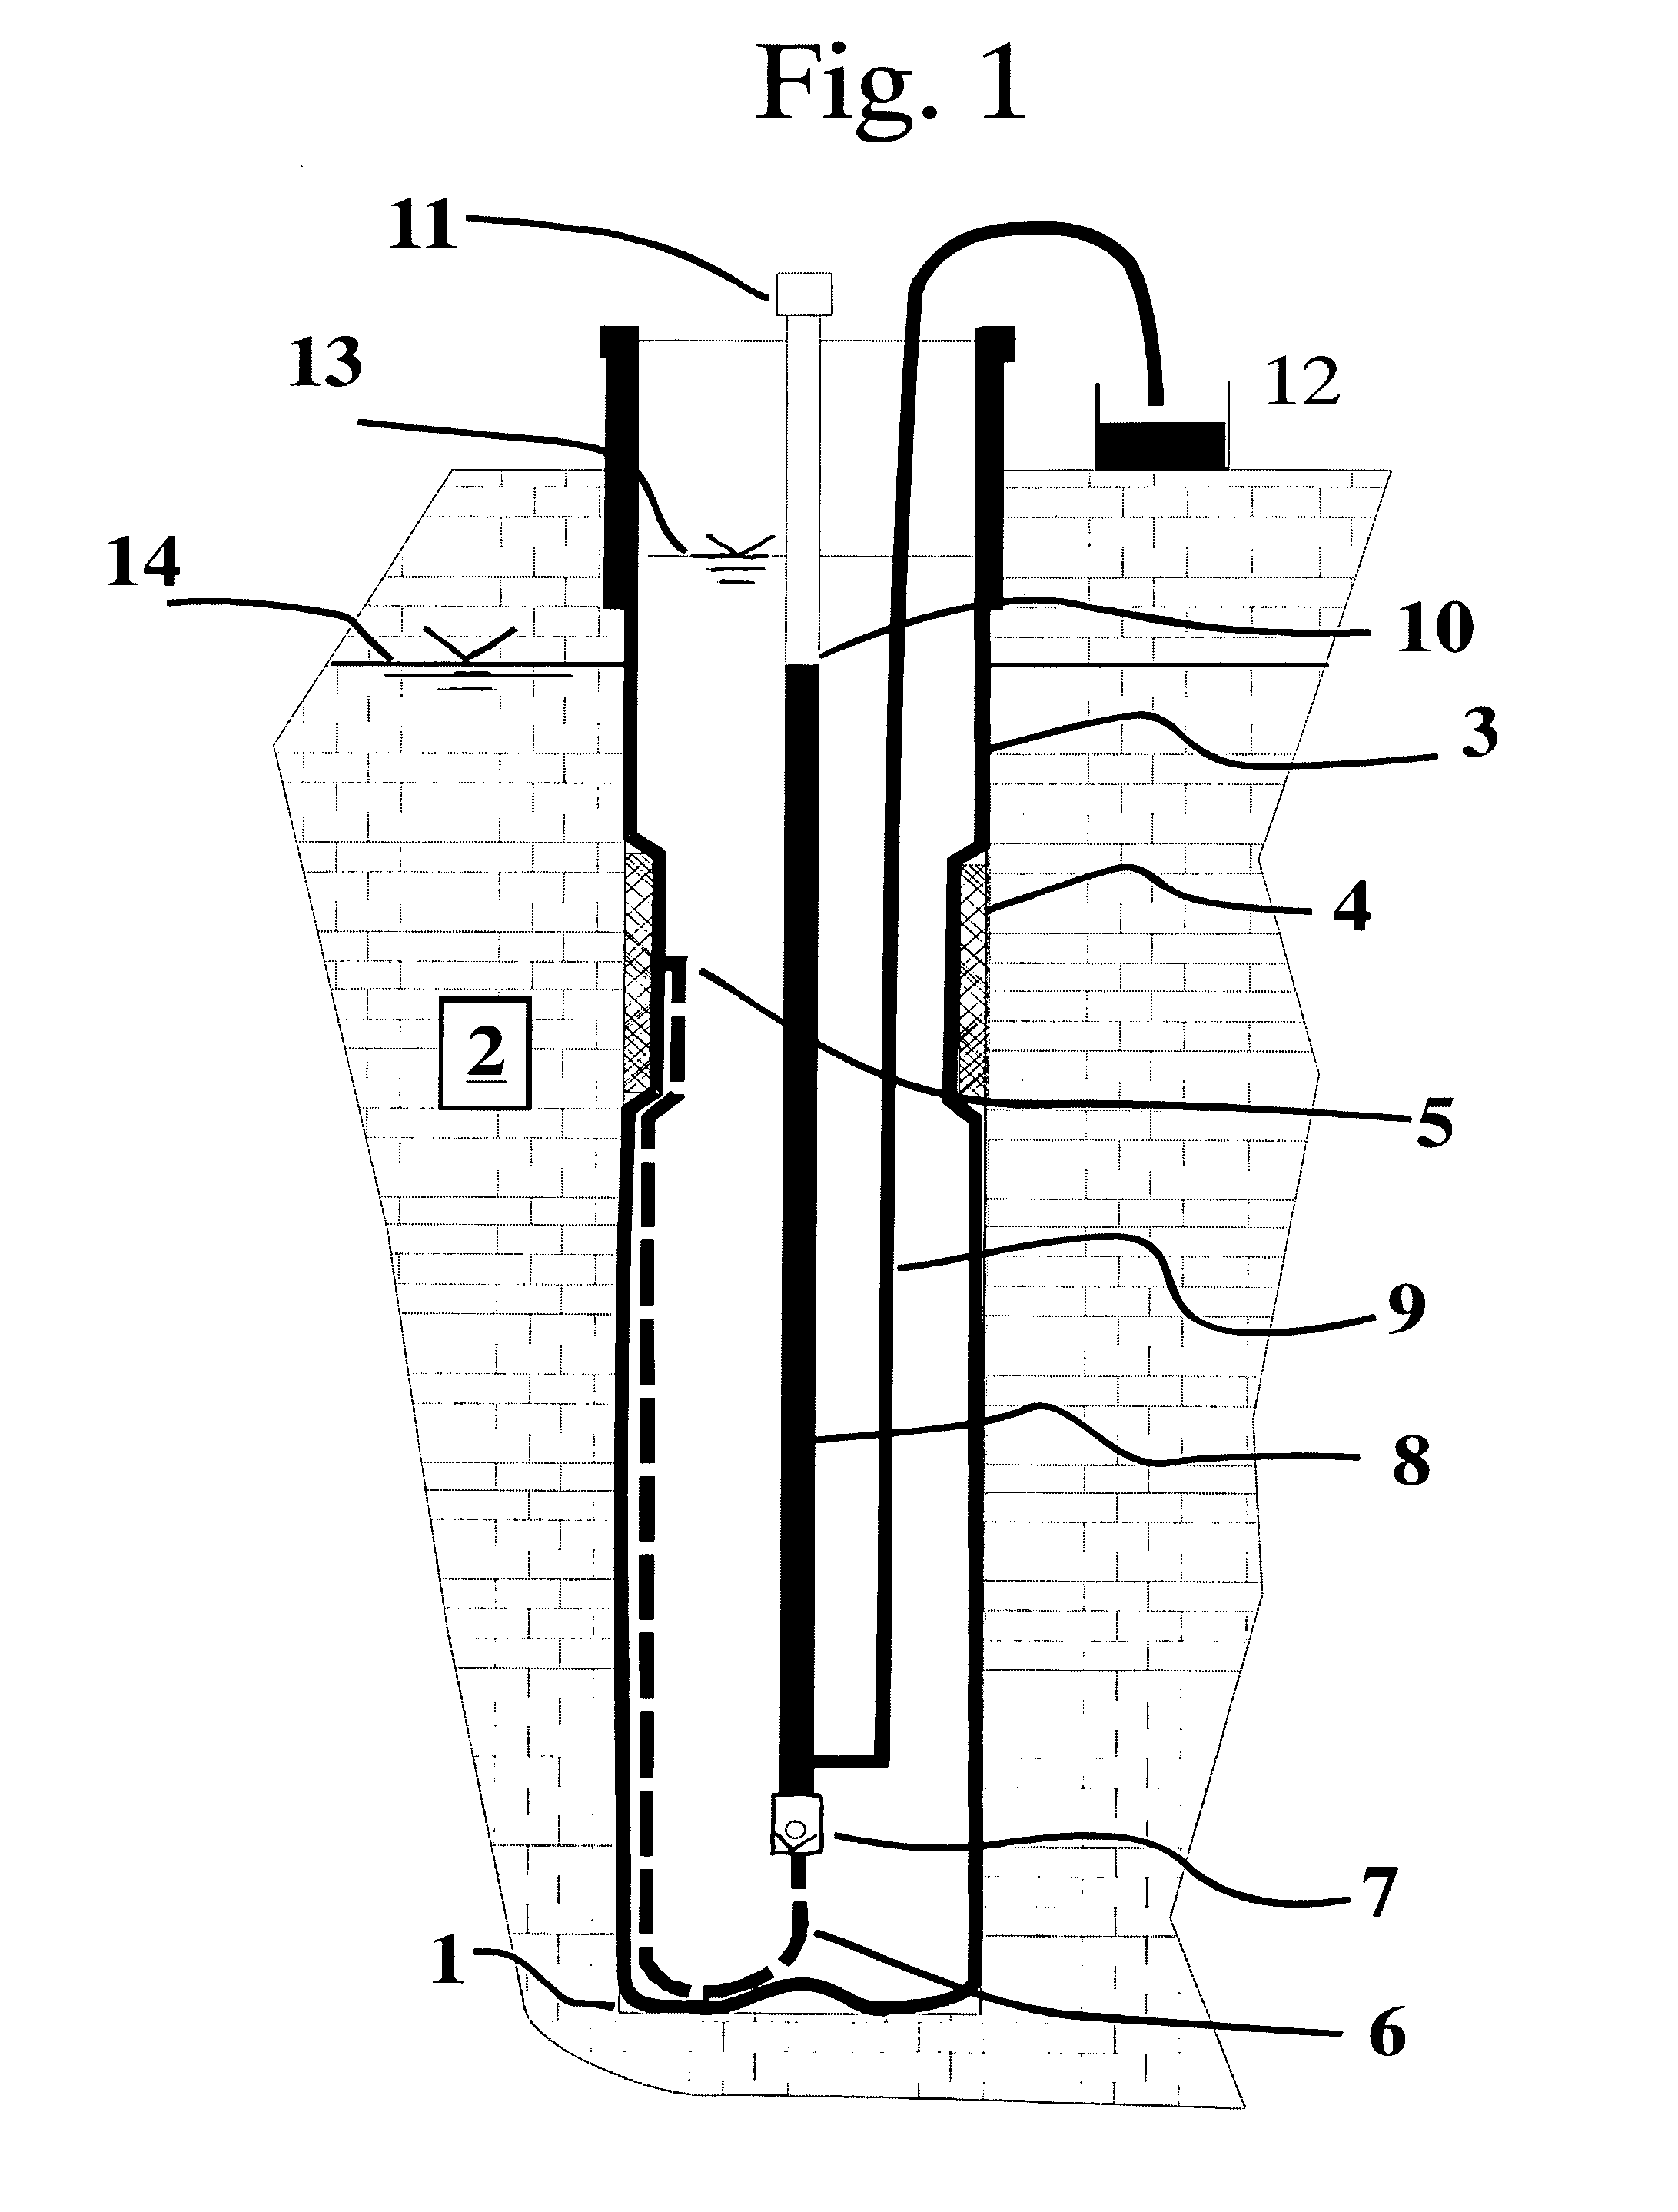 Pore fluid sampling system with diffusion barrier